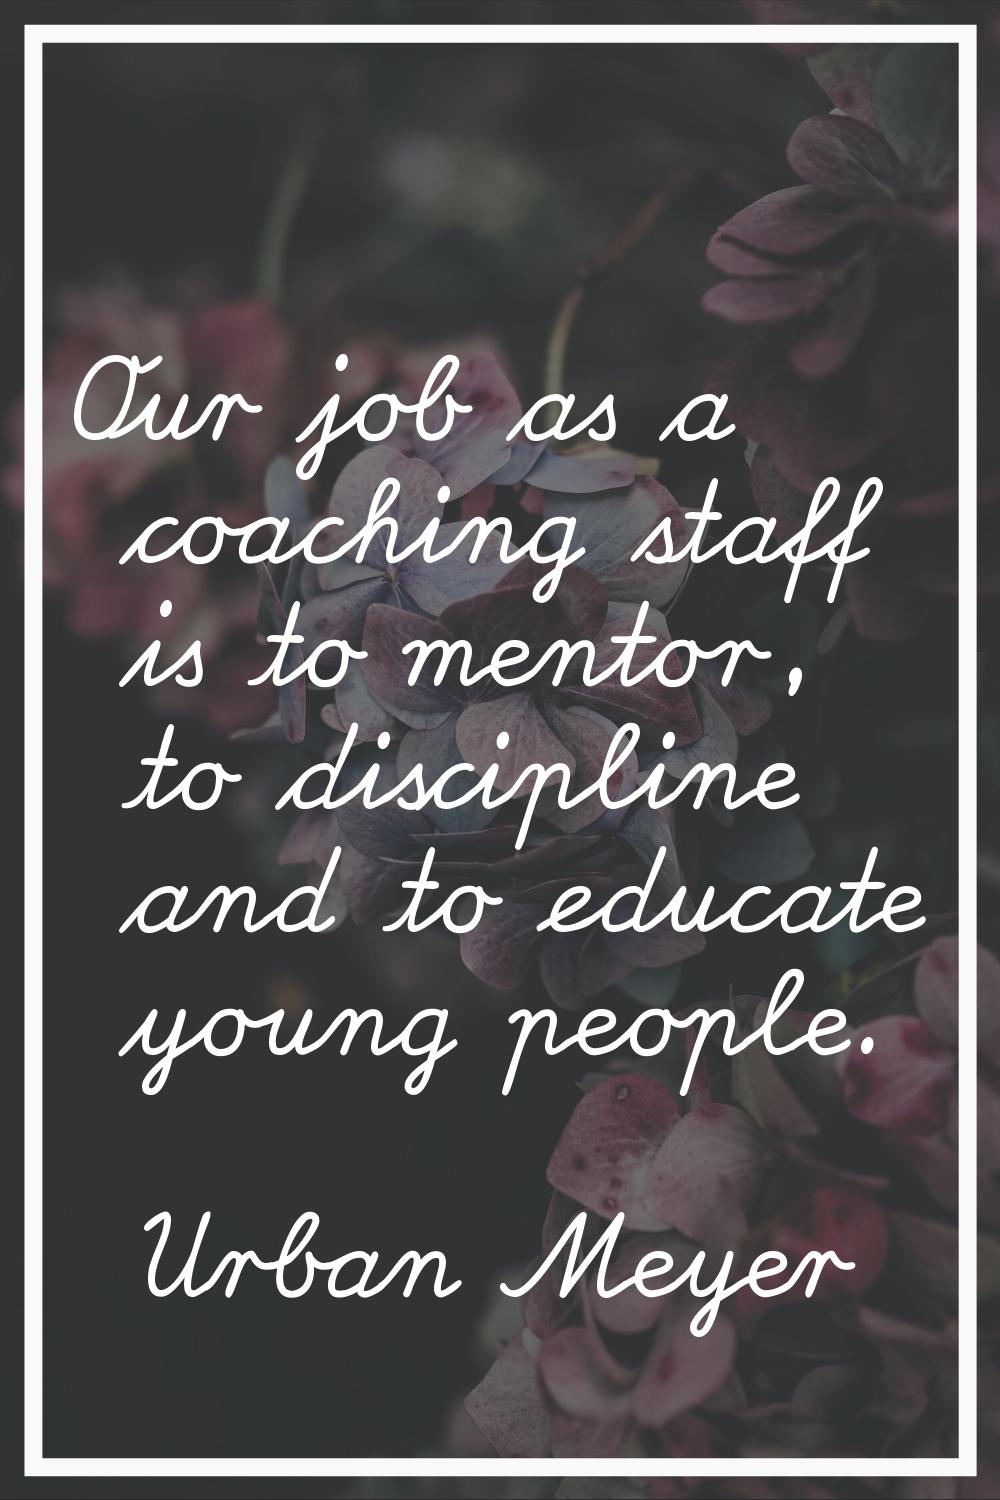 Our job as a coaching staff is to mentor, to discipline and to educate young people.